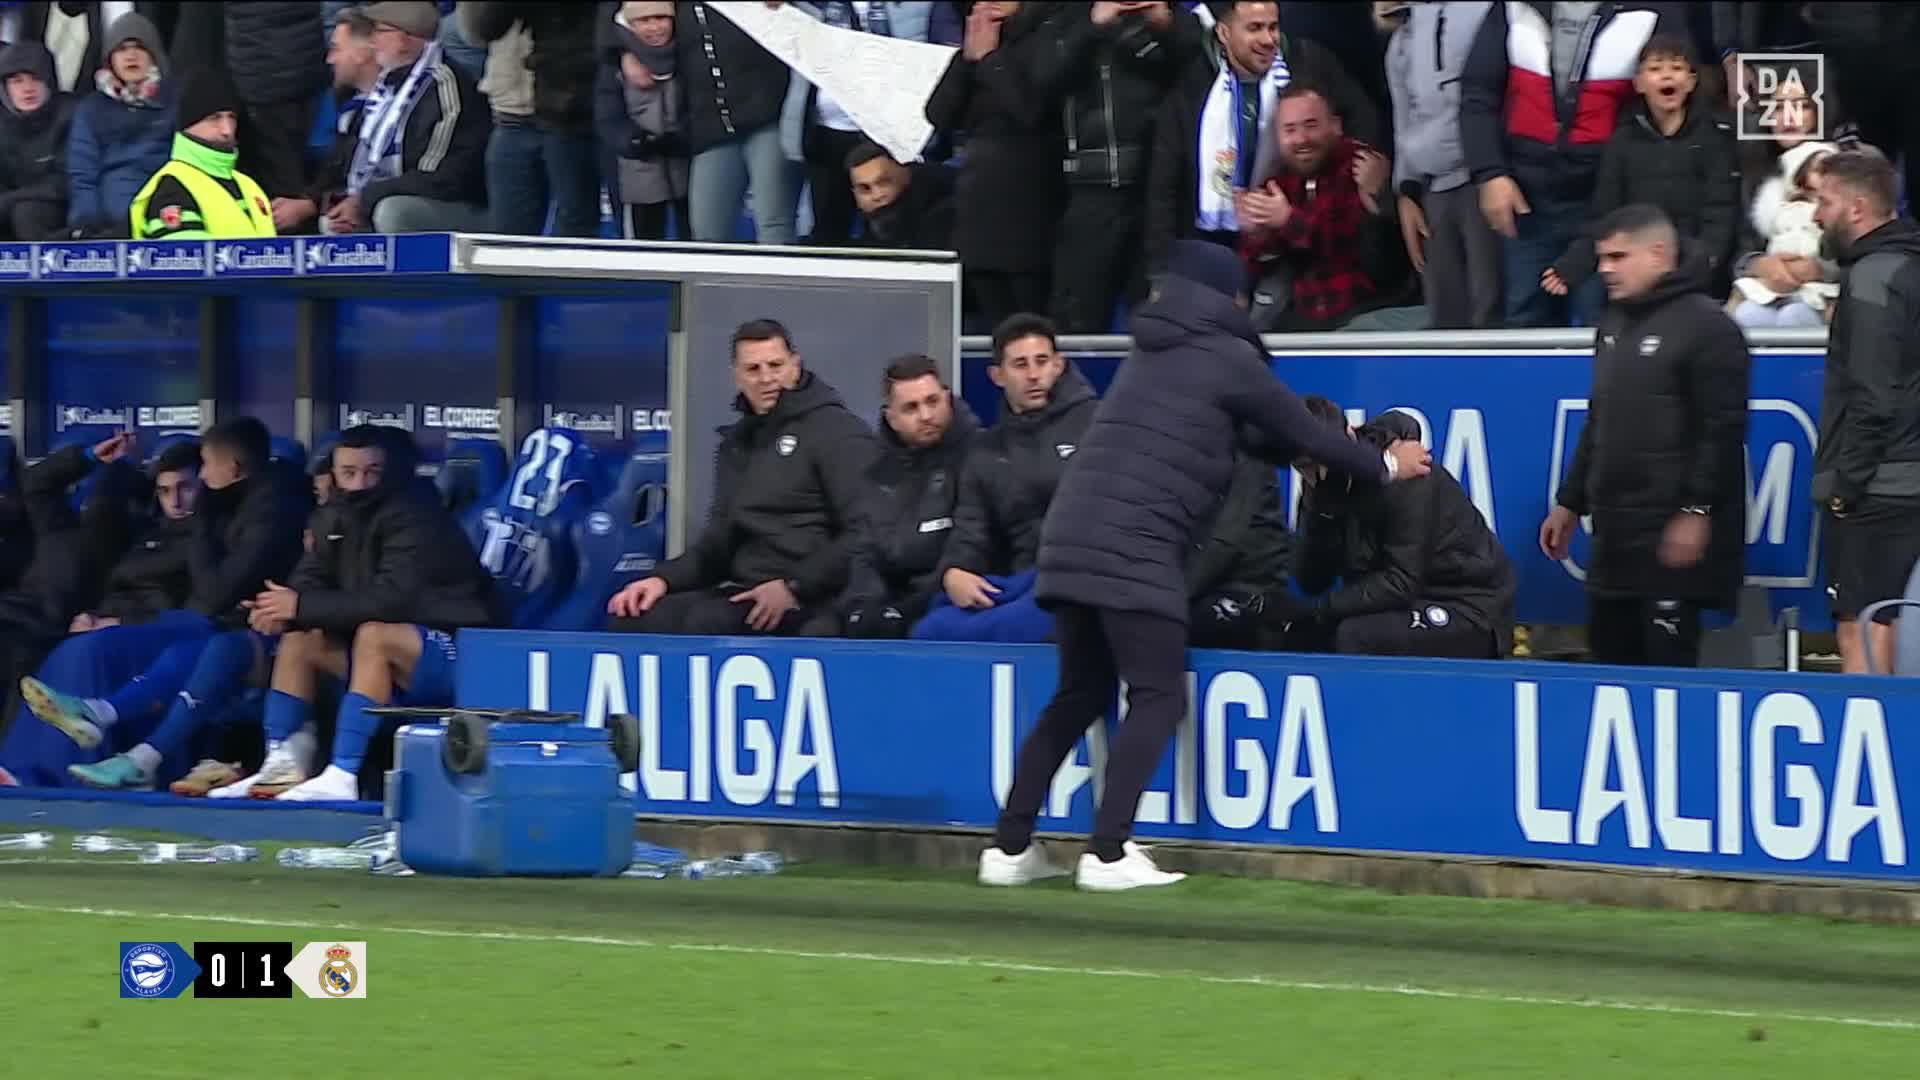 WATCH: Alaves manager Luis Garcia Plaza goes into meltdown mode after Real Madrid score late winner